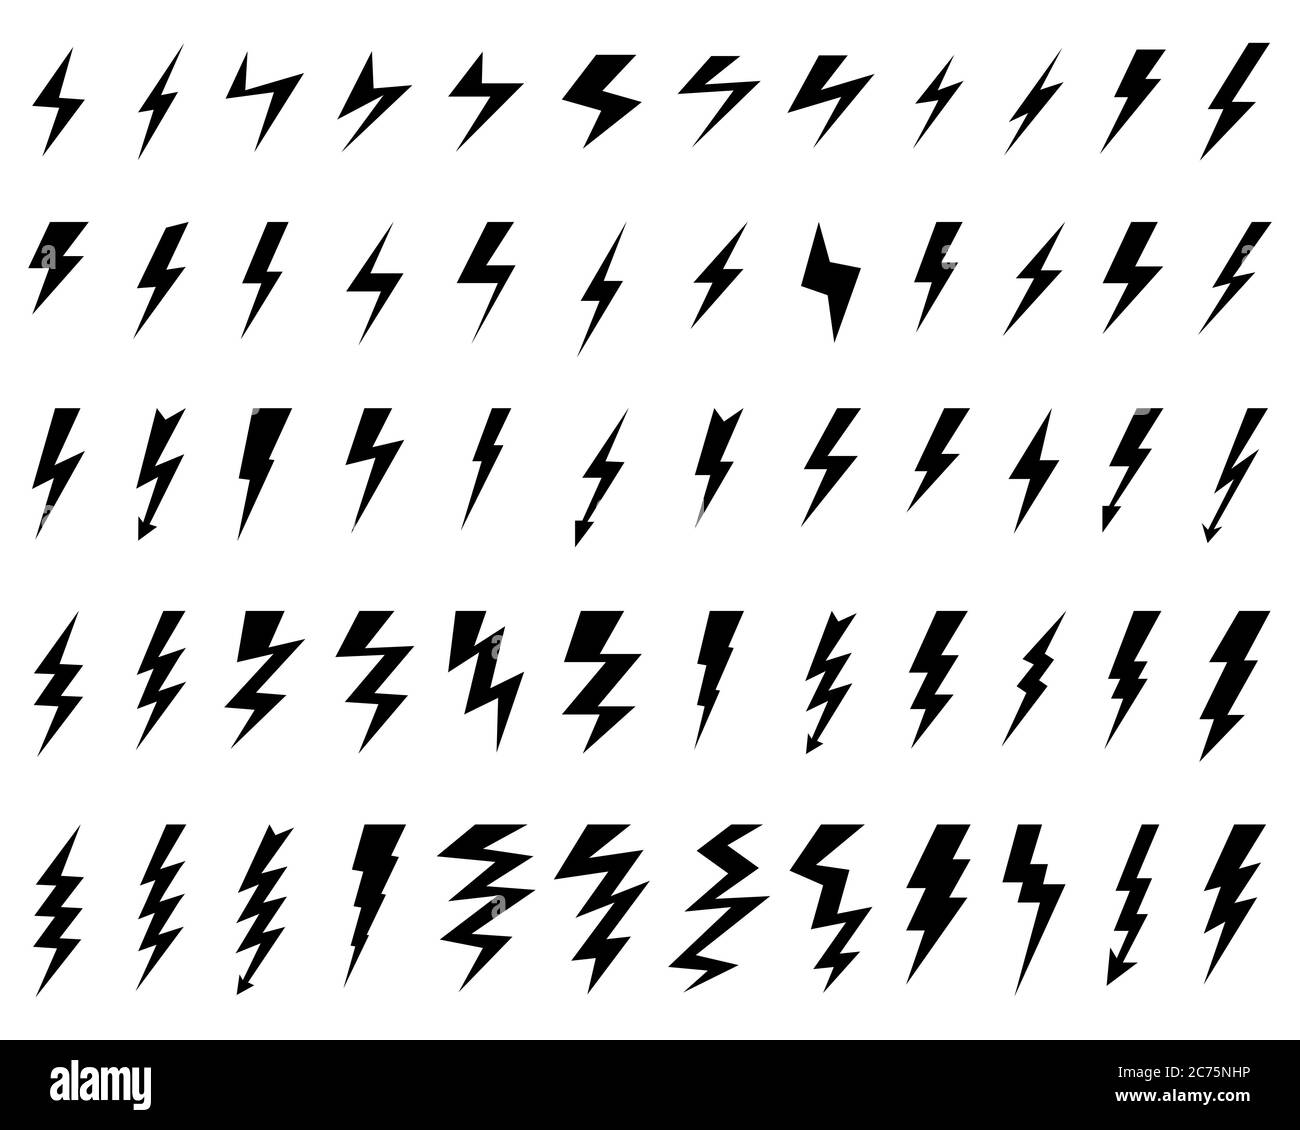 Black icons of thunder and flash lighting on a white background Stock Photo